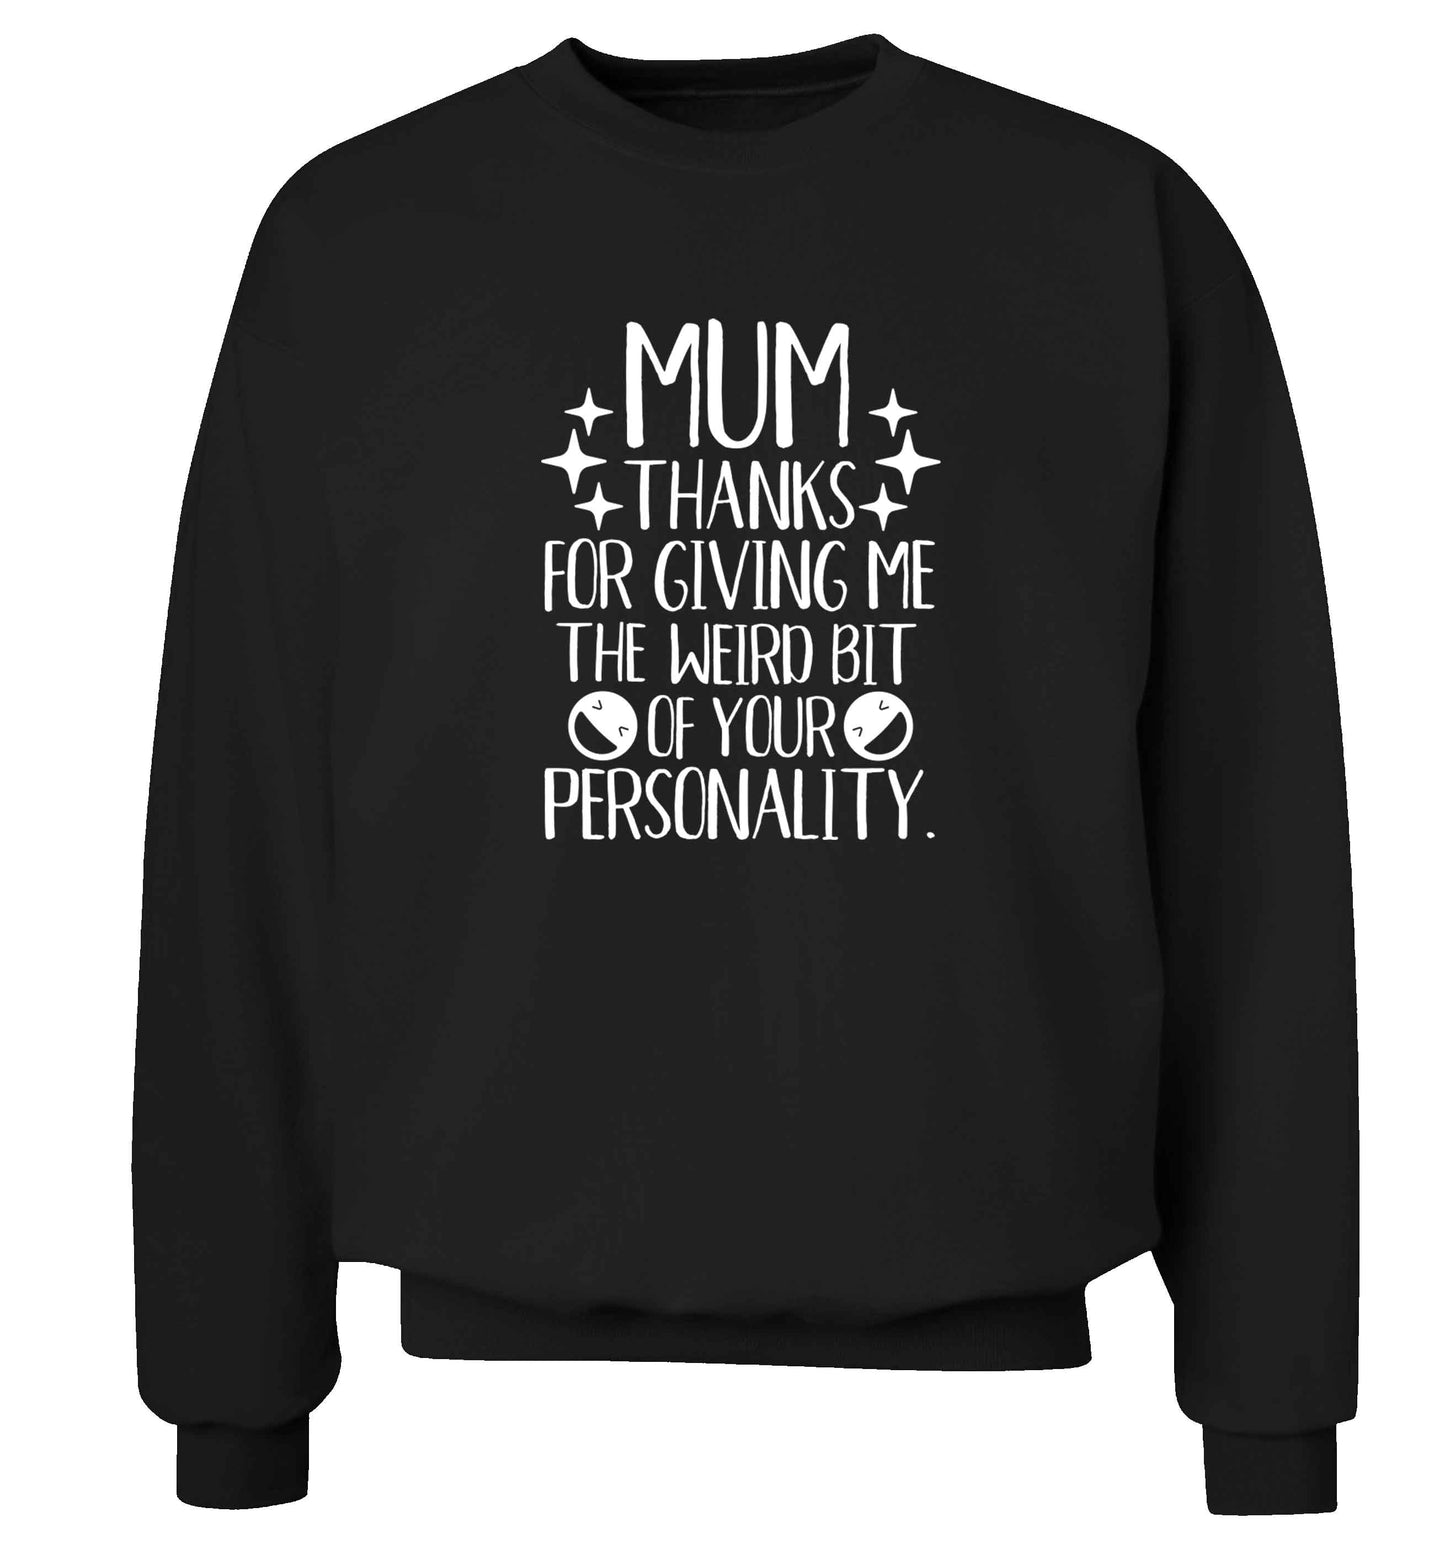 Mum thanks for giving me the weird bit of your personality adult's unisex black sweater 2XL